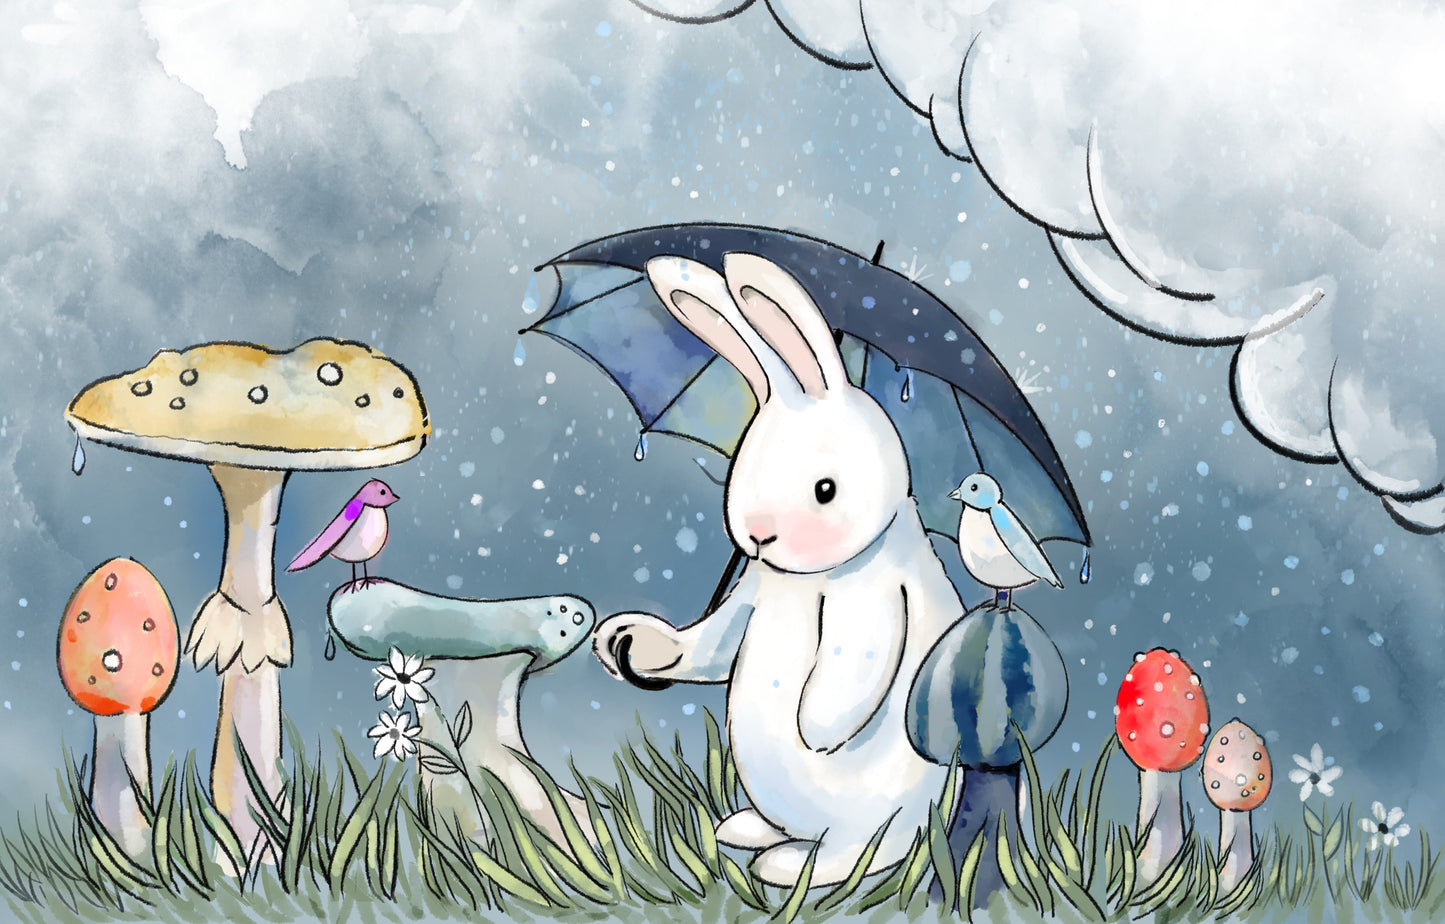 Bunny in the Rain - Illustrated Print by Thomas Little